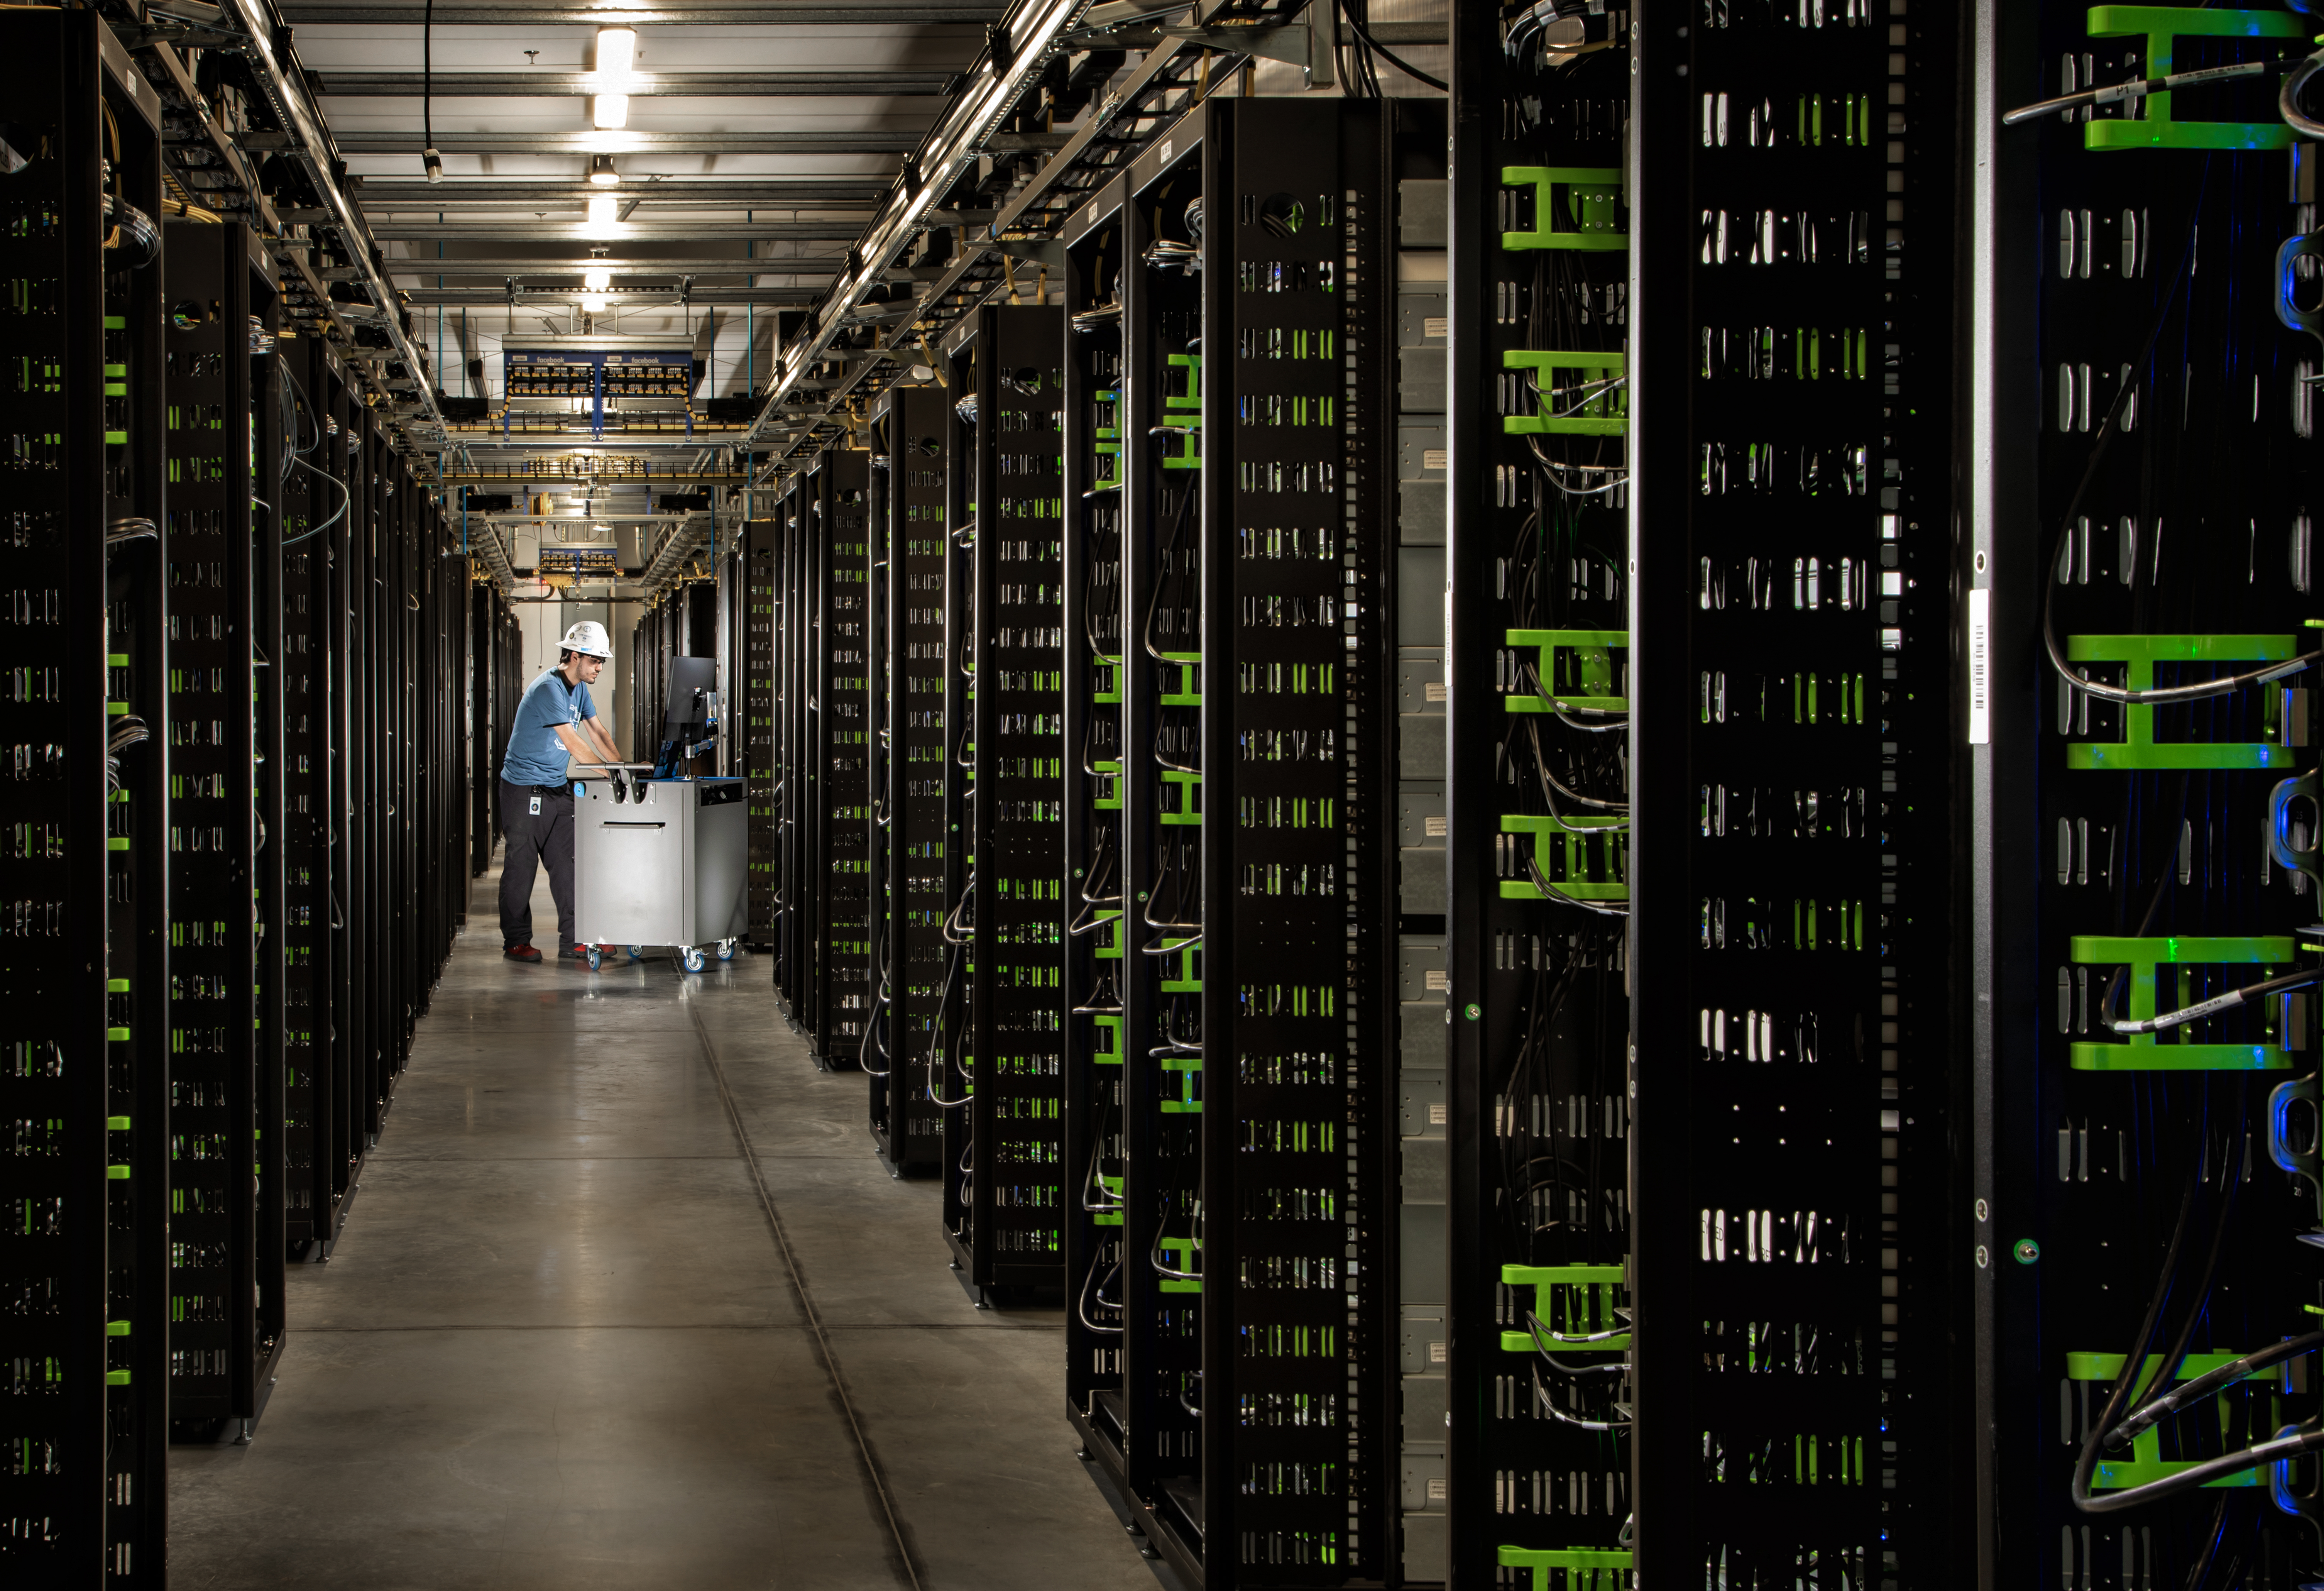 New Oregon bill proposes clean energy standards for data centers - DCD